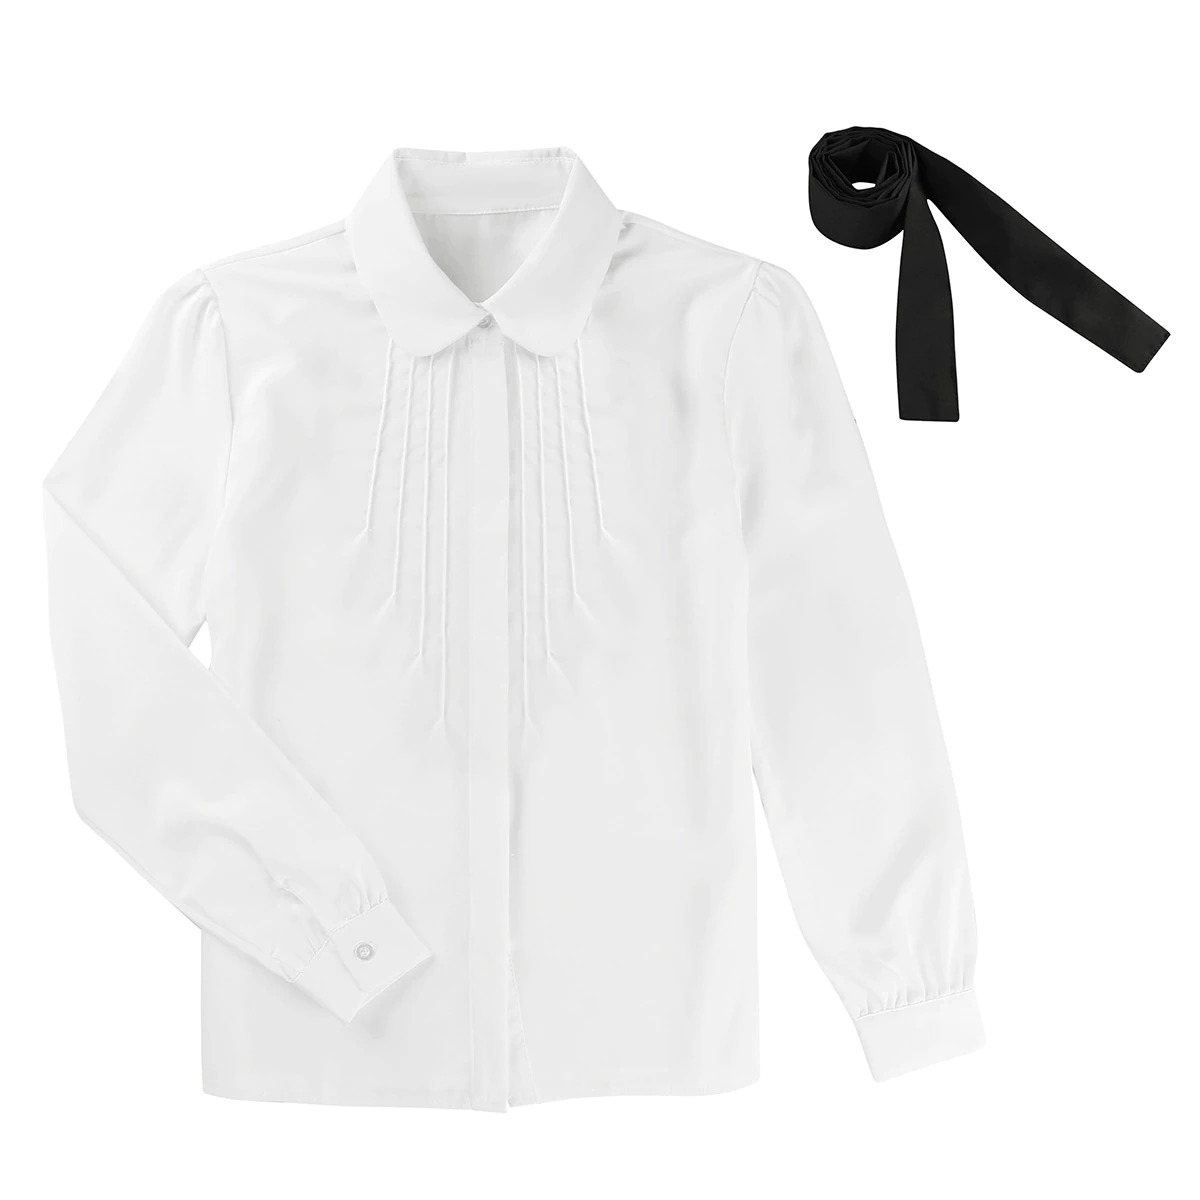 Women's Long Sleeve Button-Up Shirt With Black Removable Bowknot / Turn-Down Collar Spring Blouse - HARD'N'HEAVY